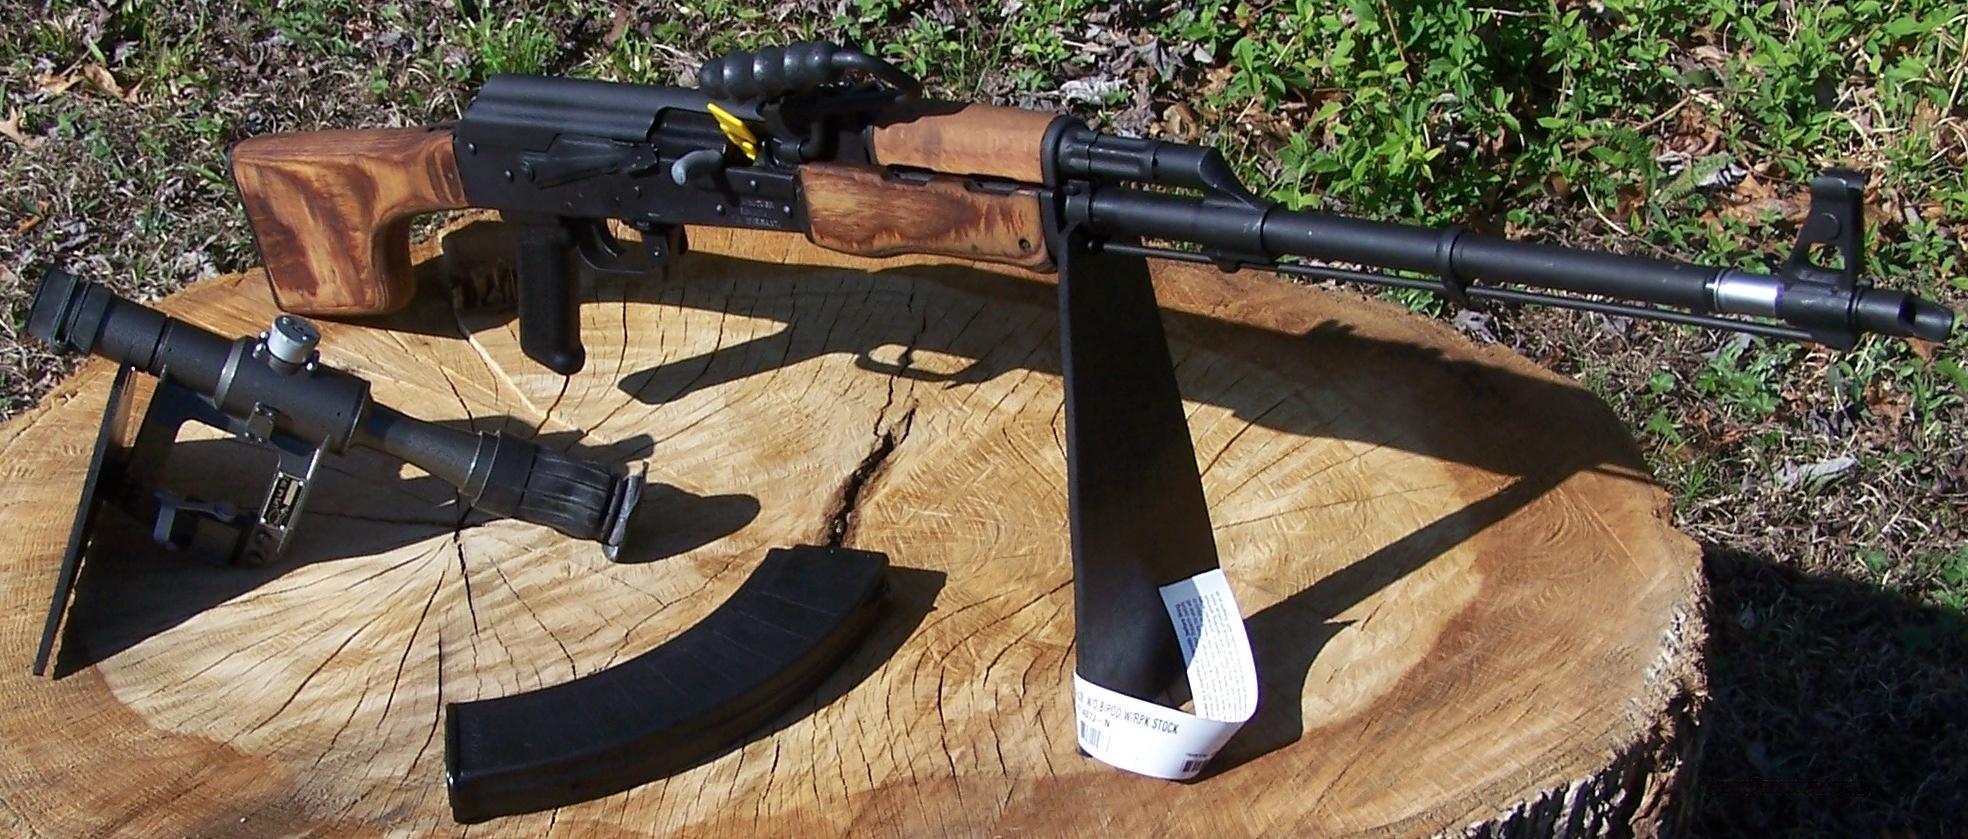 Read our comparison of the top 5 AK-47 scopes and get the best AK-47 sc...